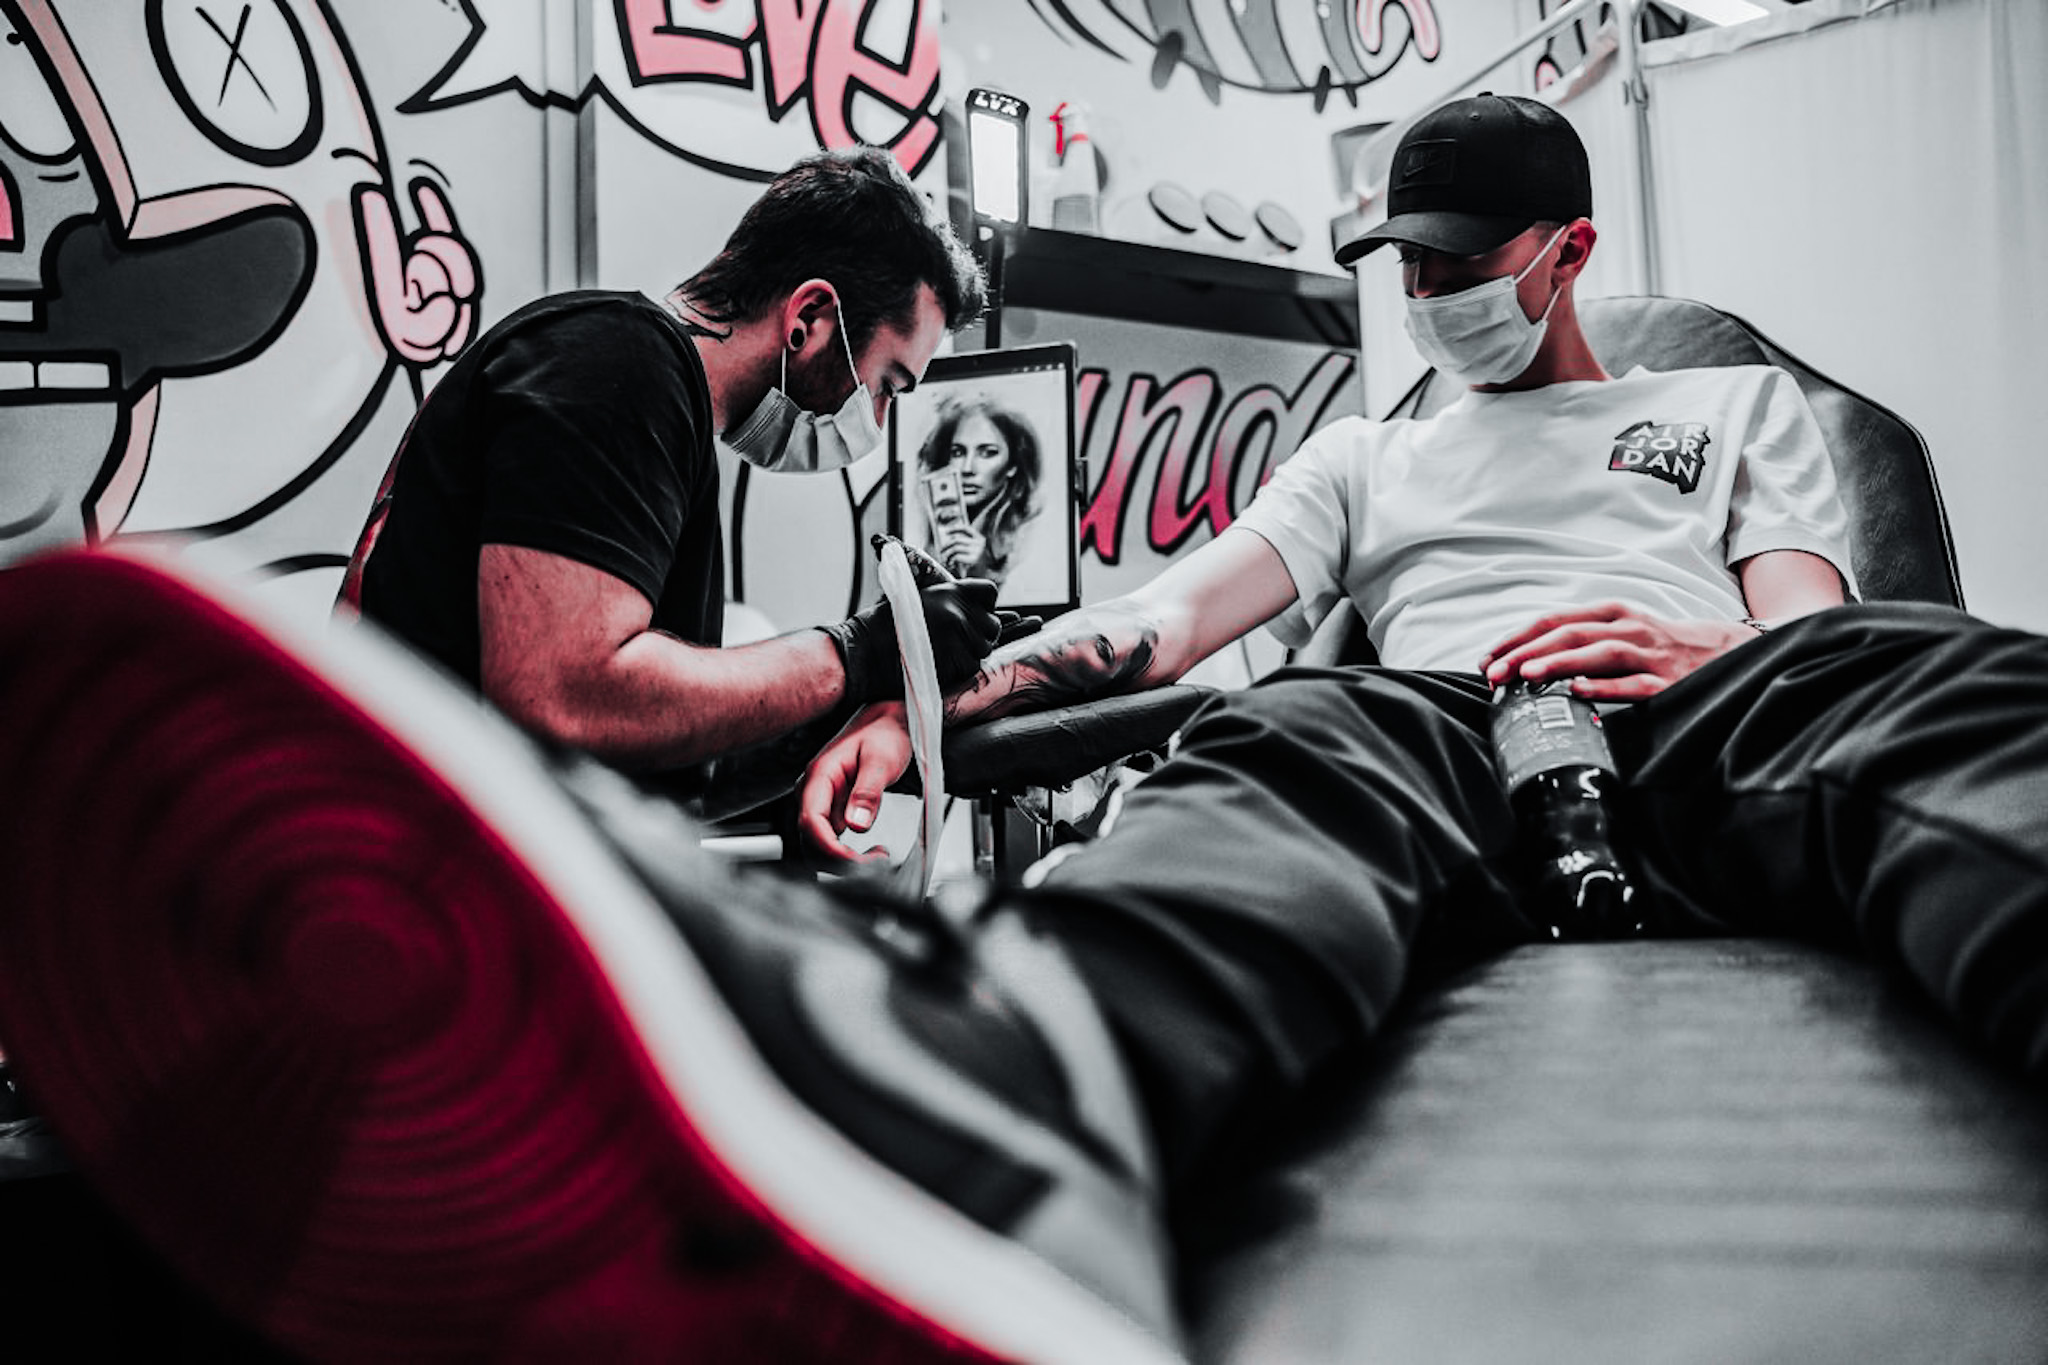 How to safely choose a Tattoo Shop and Artist